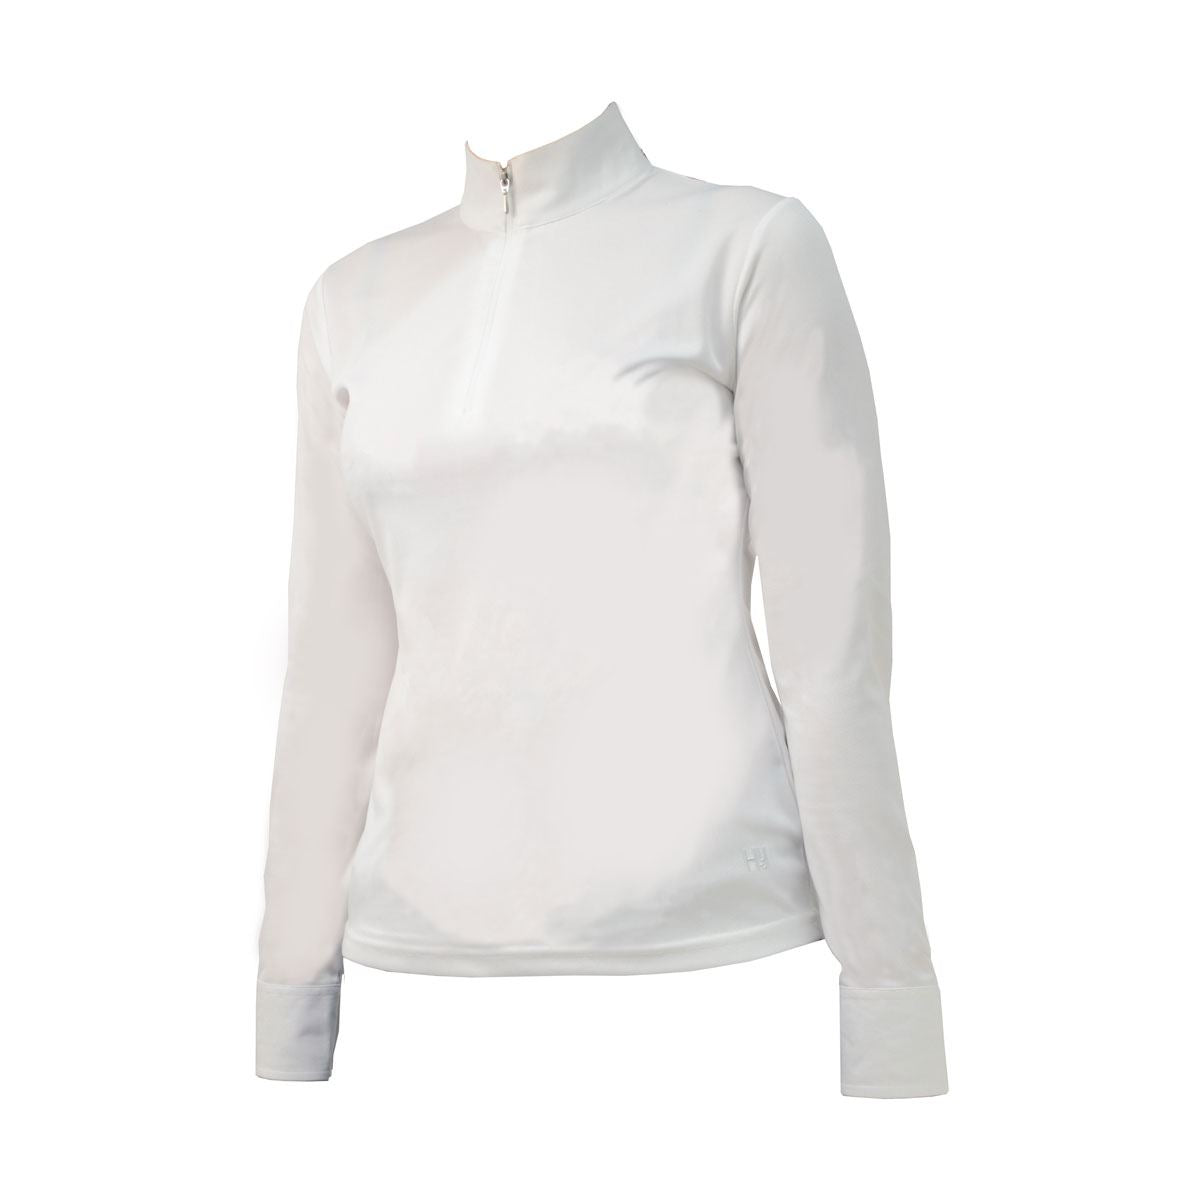 HyFASHION Charlotte Long Sleeved Show Shirt - Just Horse Riders